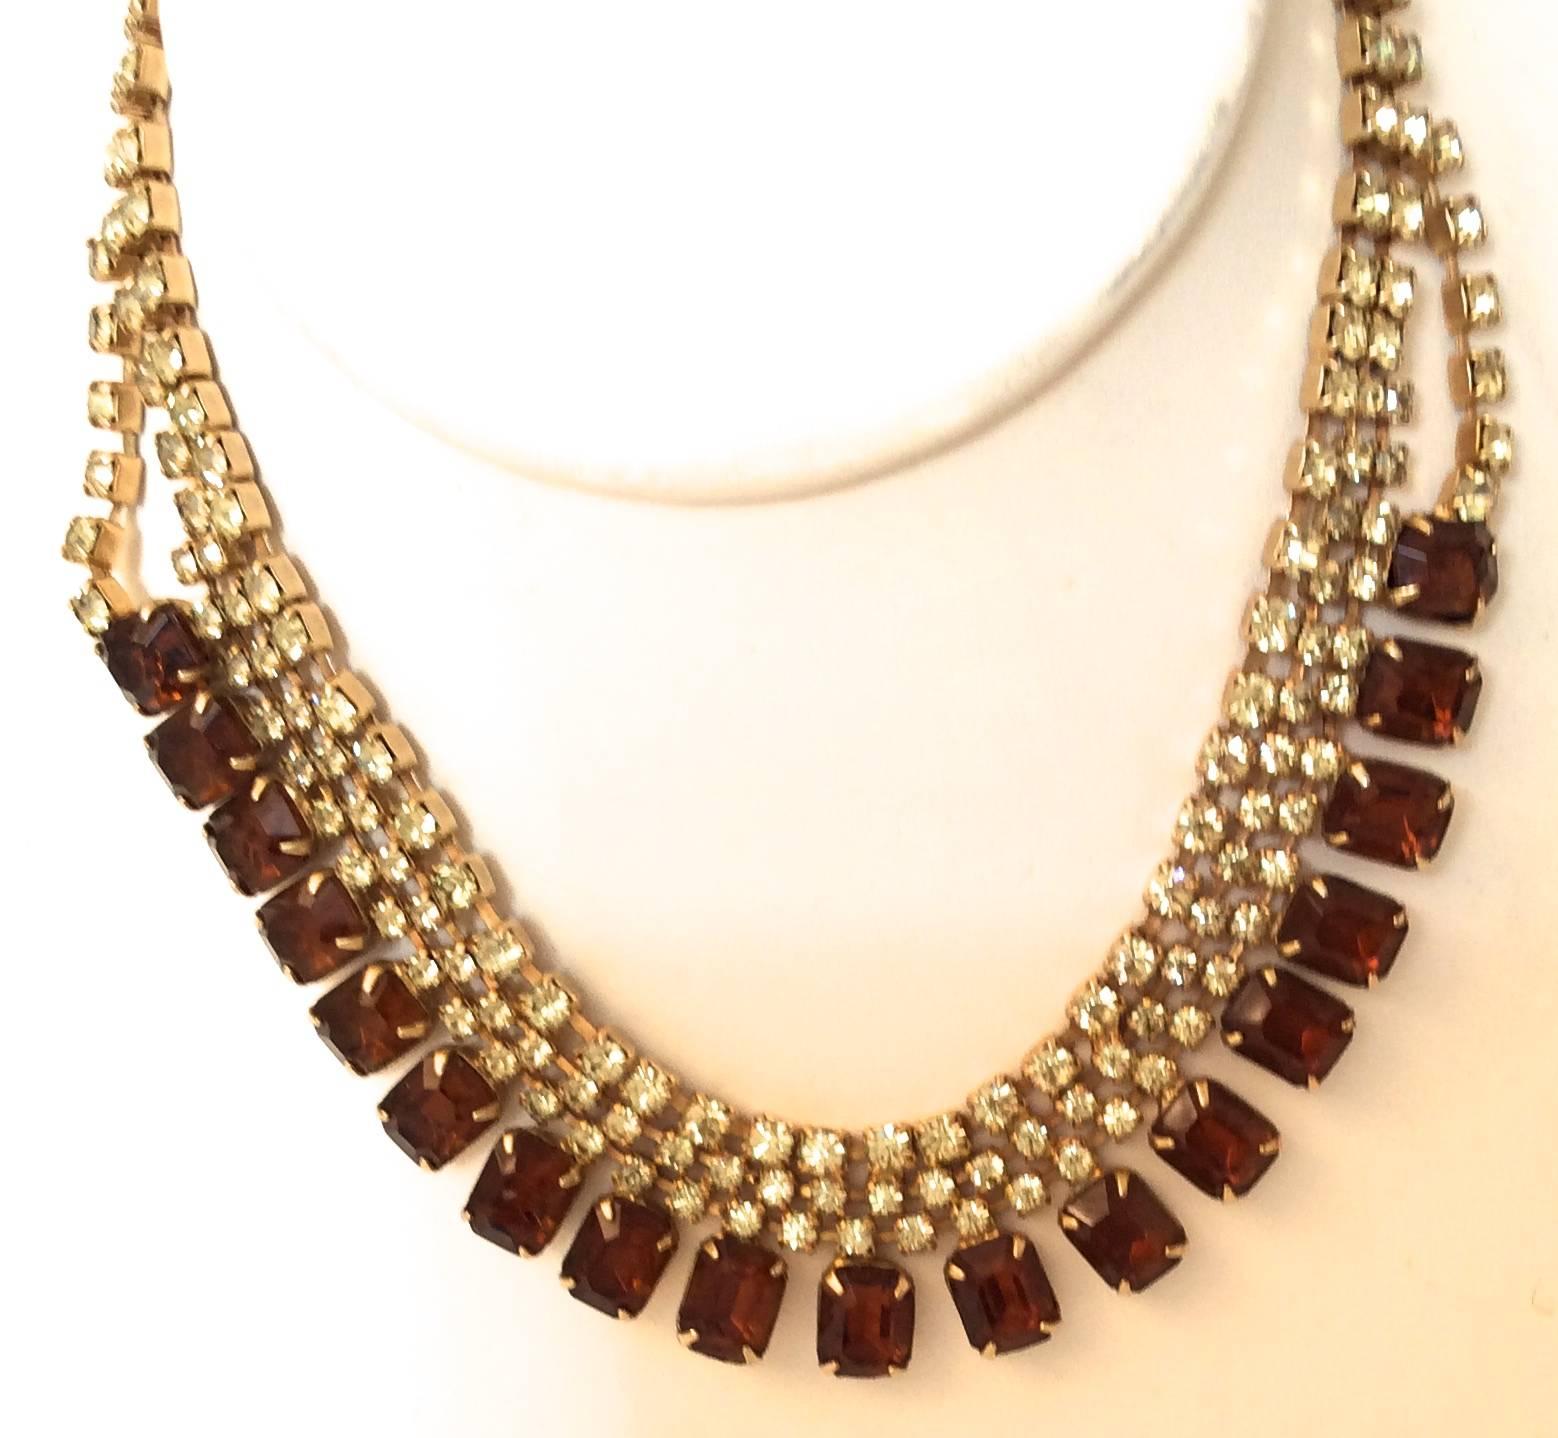 Presented here is a beautiful rhinestone necklace from the 1950's. There is one row of emerald shape amber colored rhinestones on the front of the necklace. There are an additional 3 strands of smaller yellow rhinestones throughout the length of the